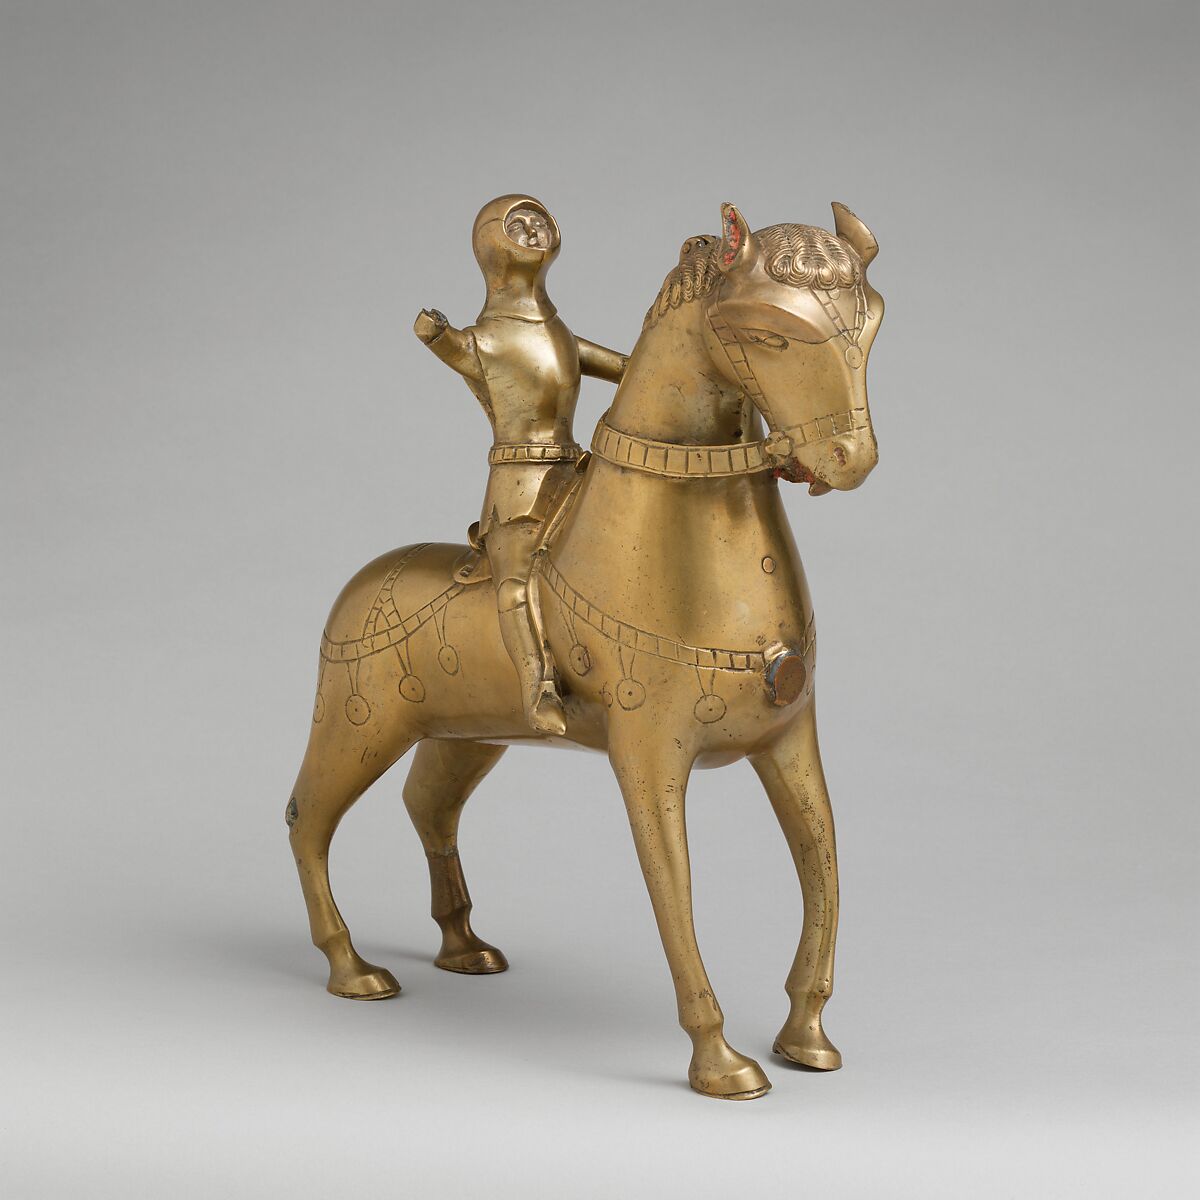 Aquamanile in the Form of a Soldier on Horseback, Copper alloy, German 